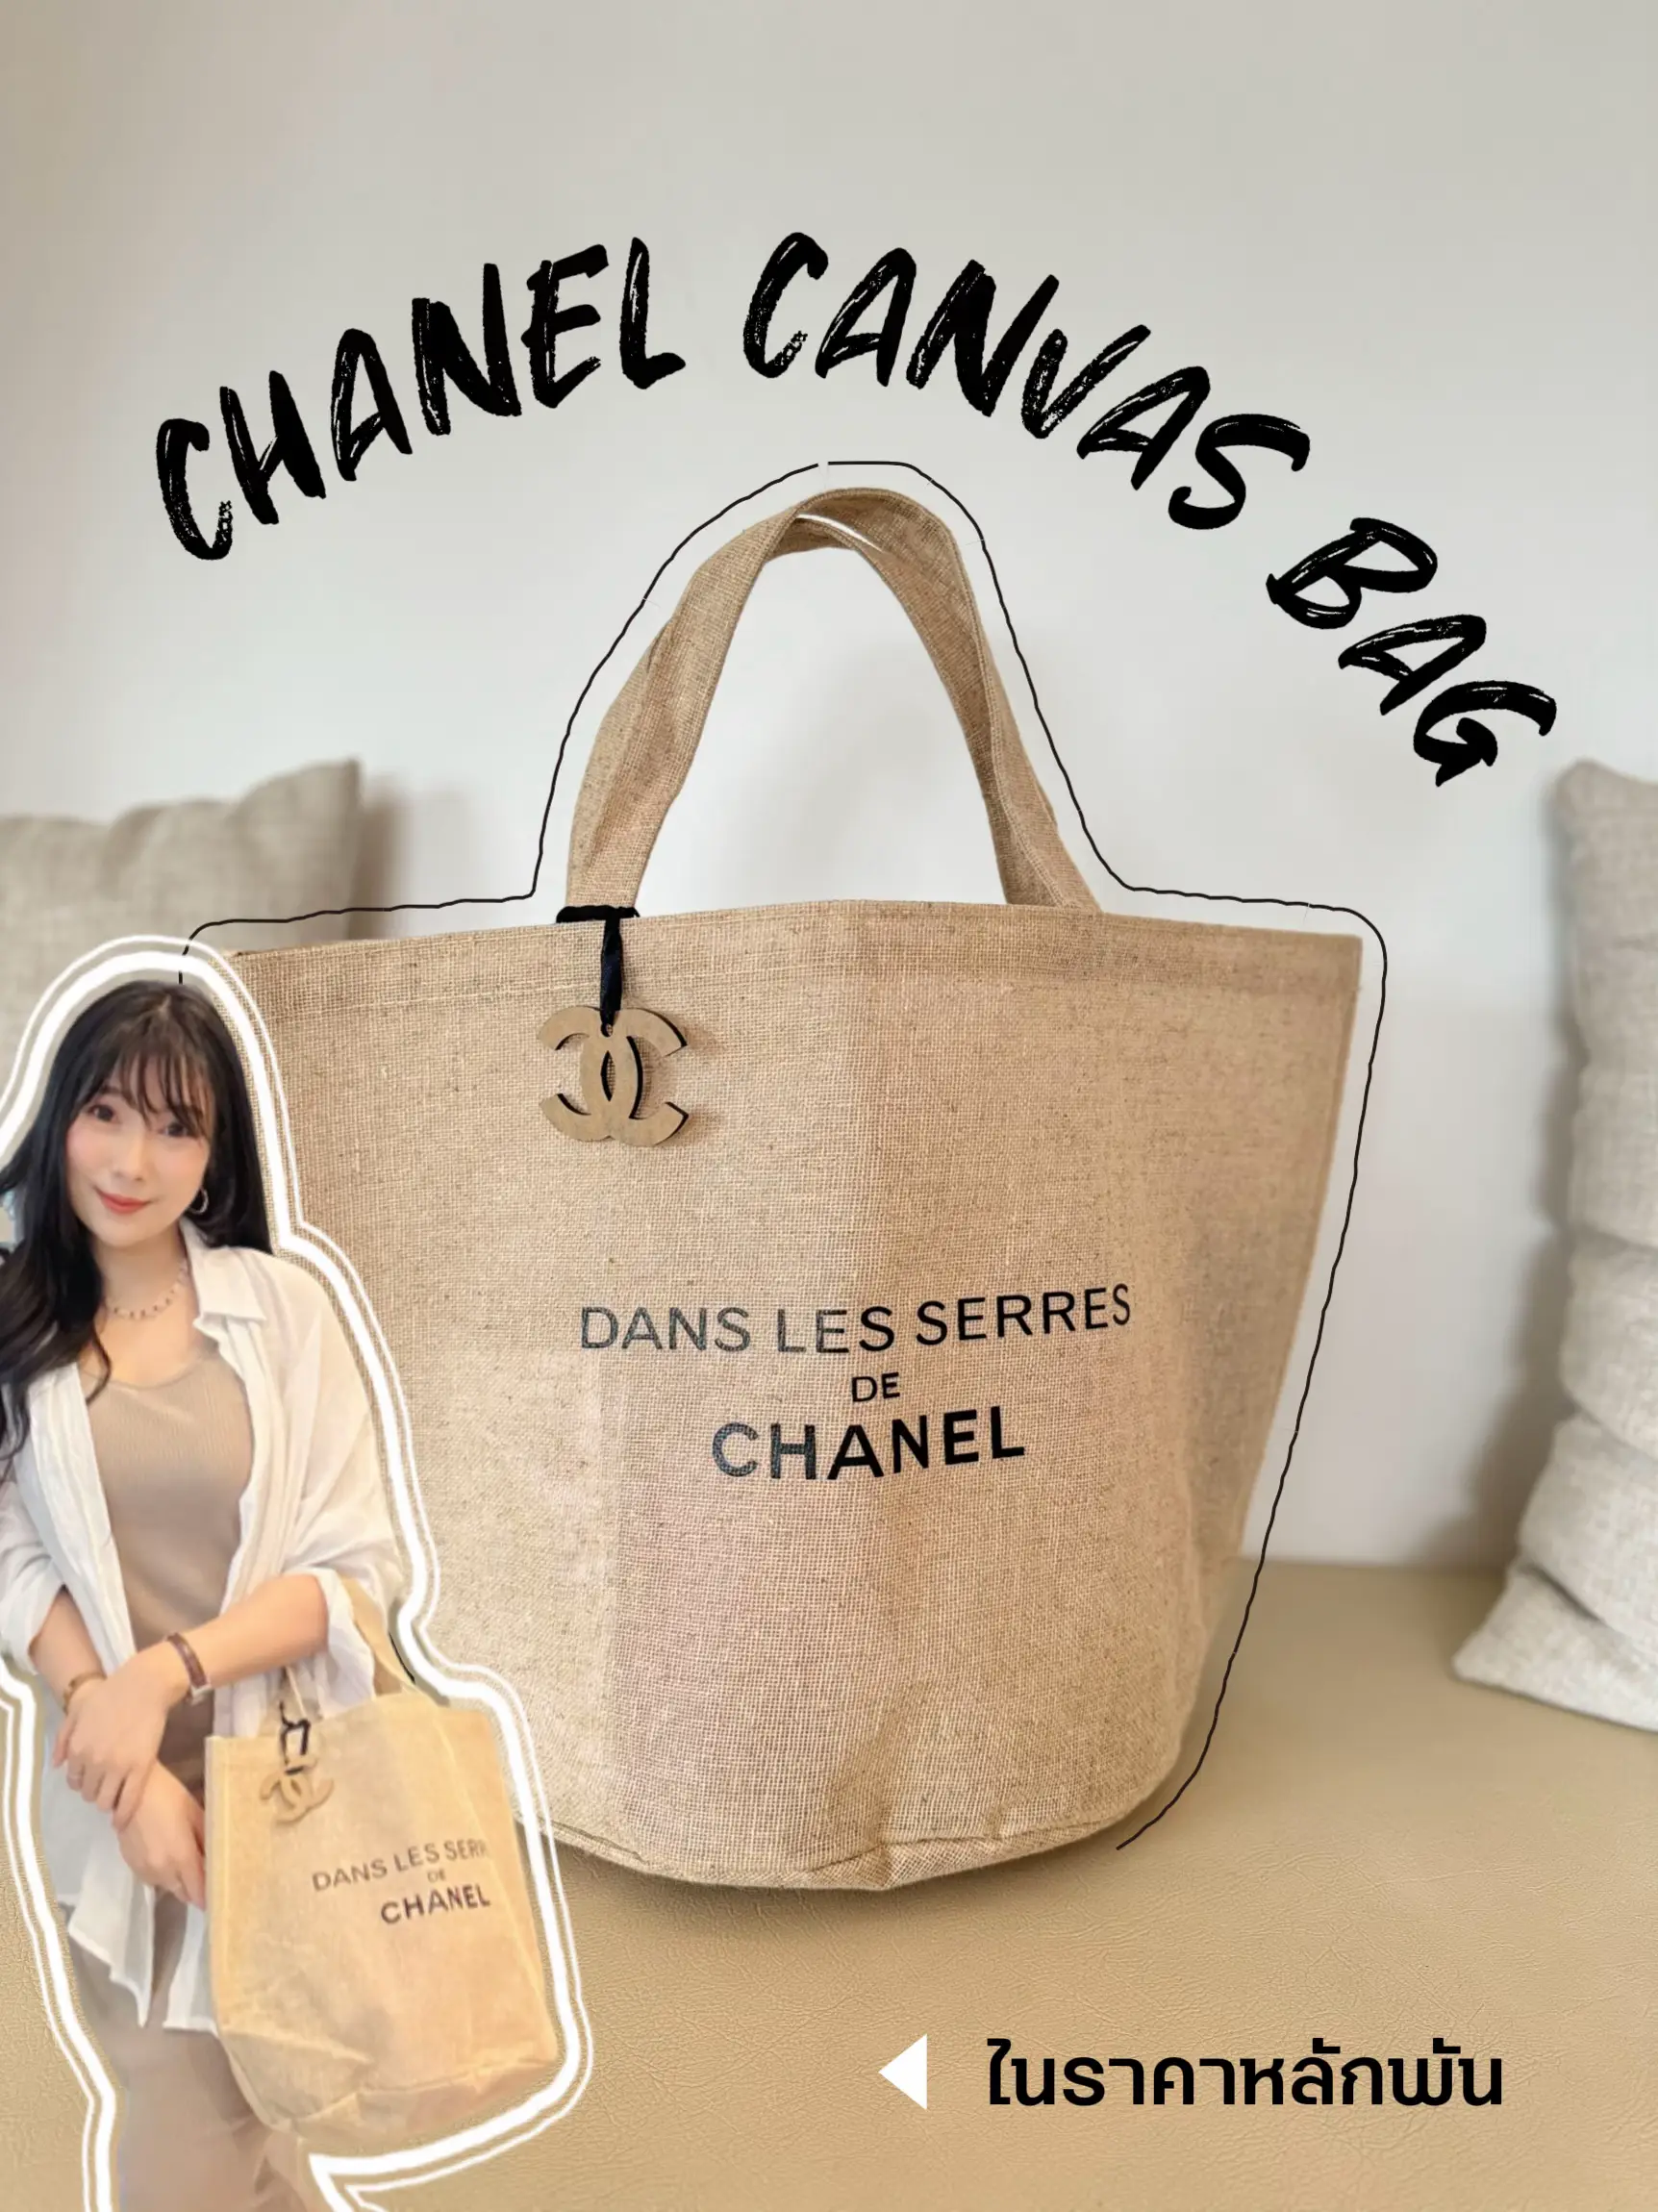 ✨CHANEL CANVAS BAG at a very cute price.✨, Gallery posted by Nunanettshi